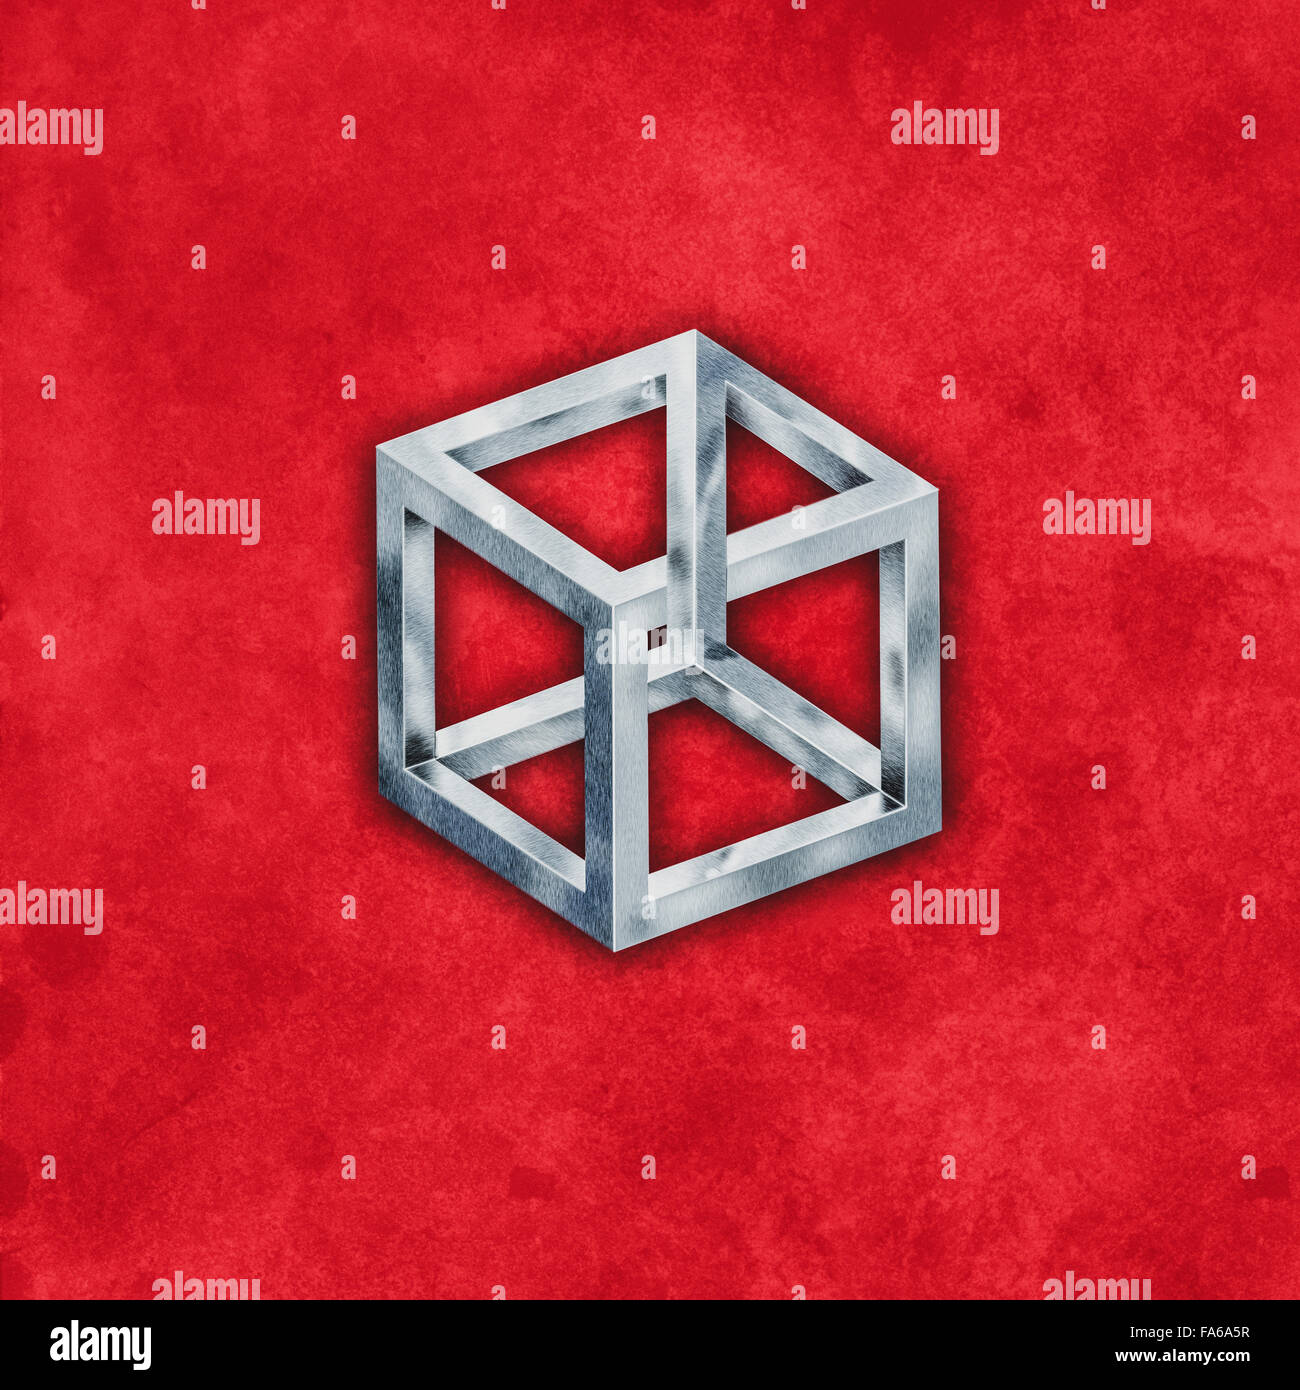 Escher cube on a red background Stock Photo